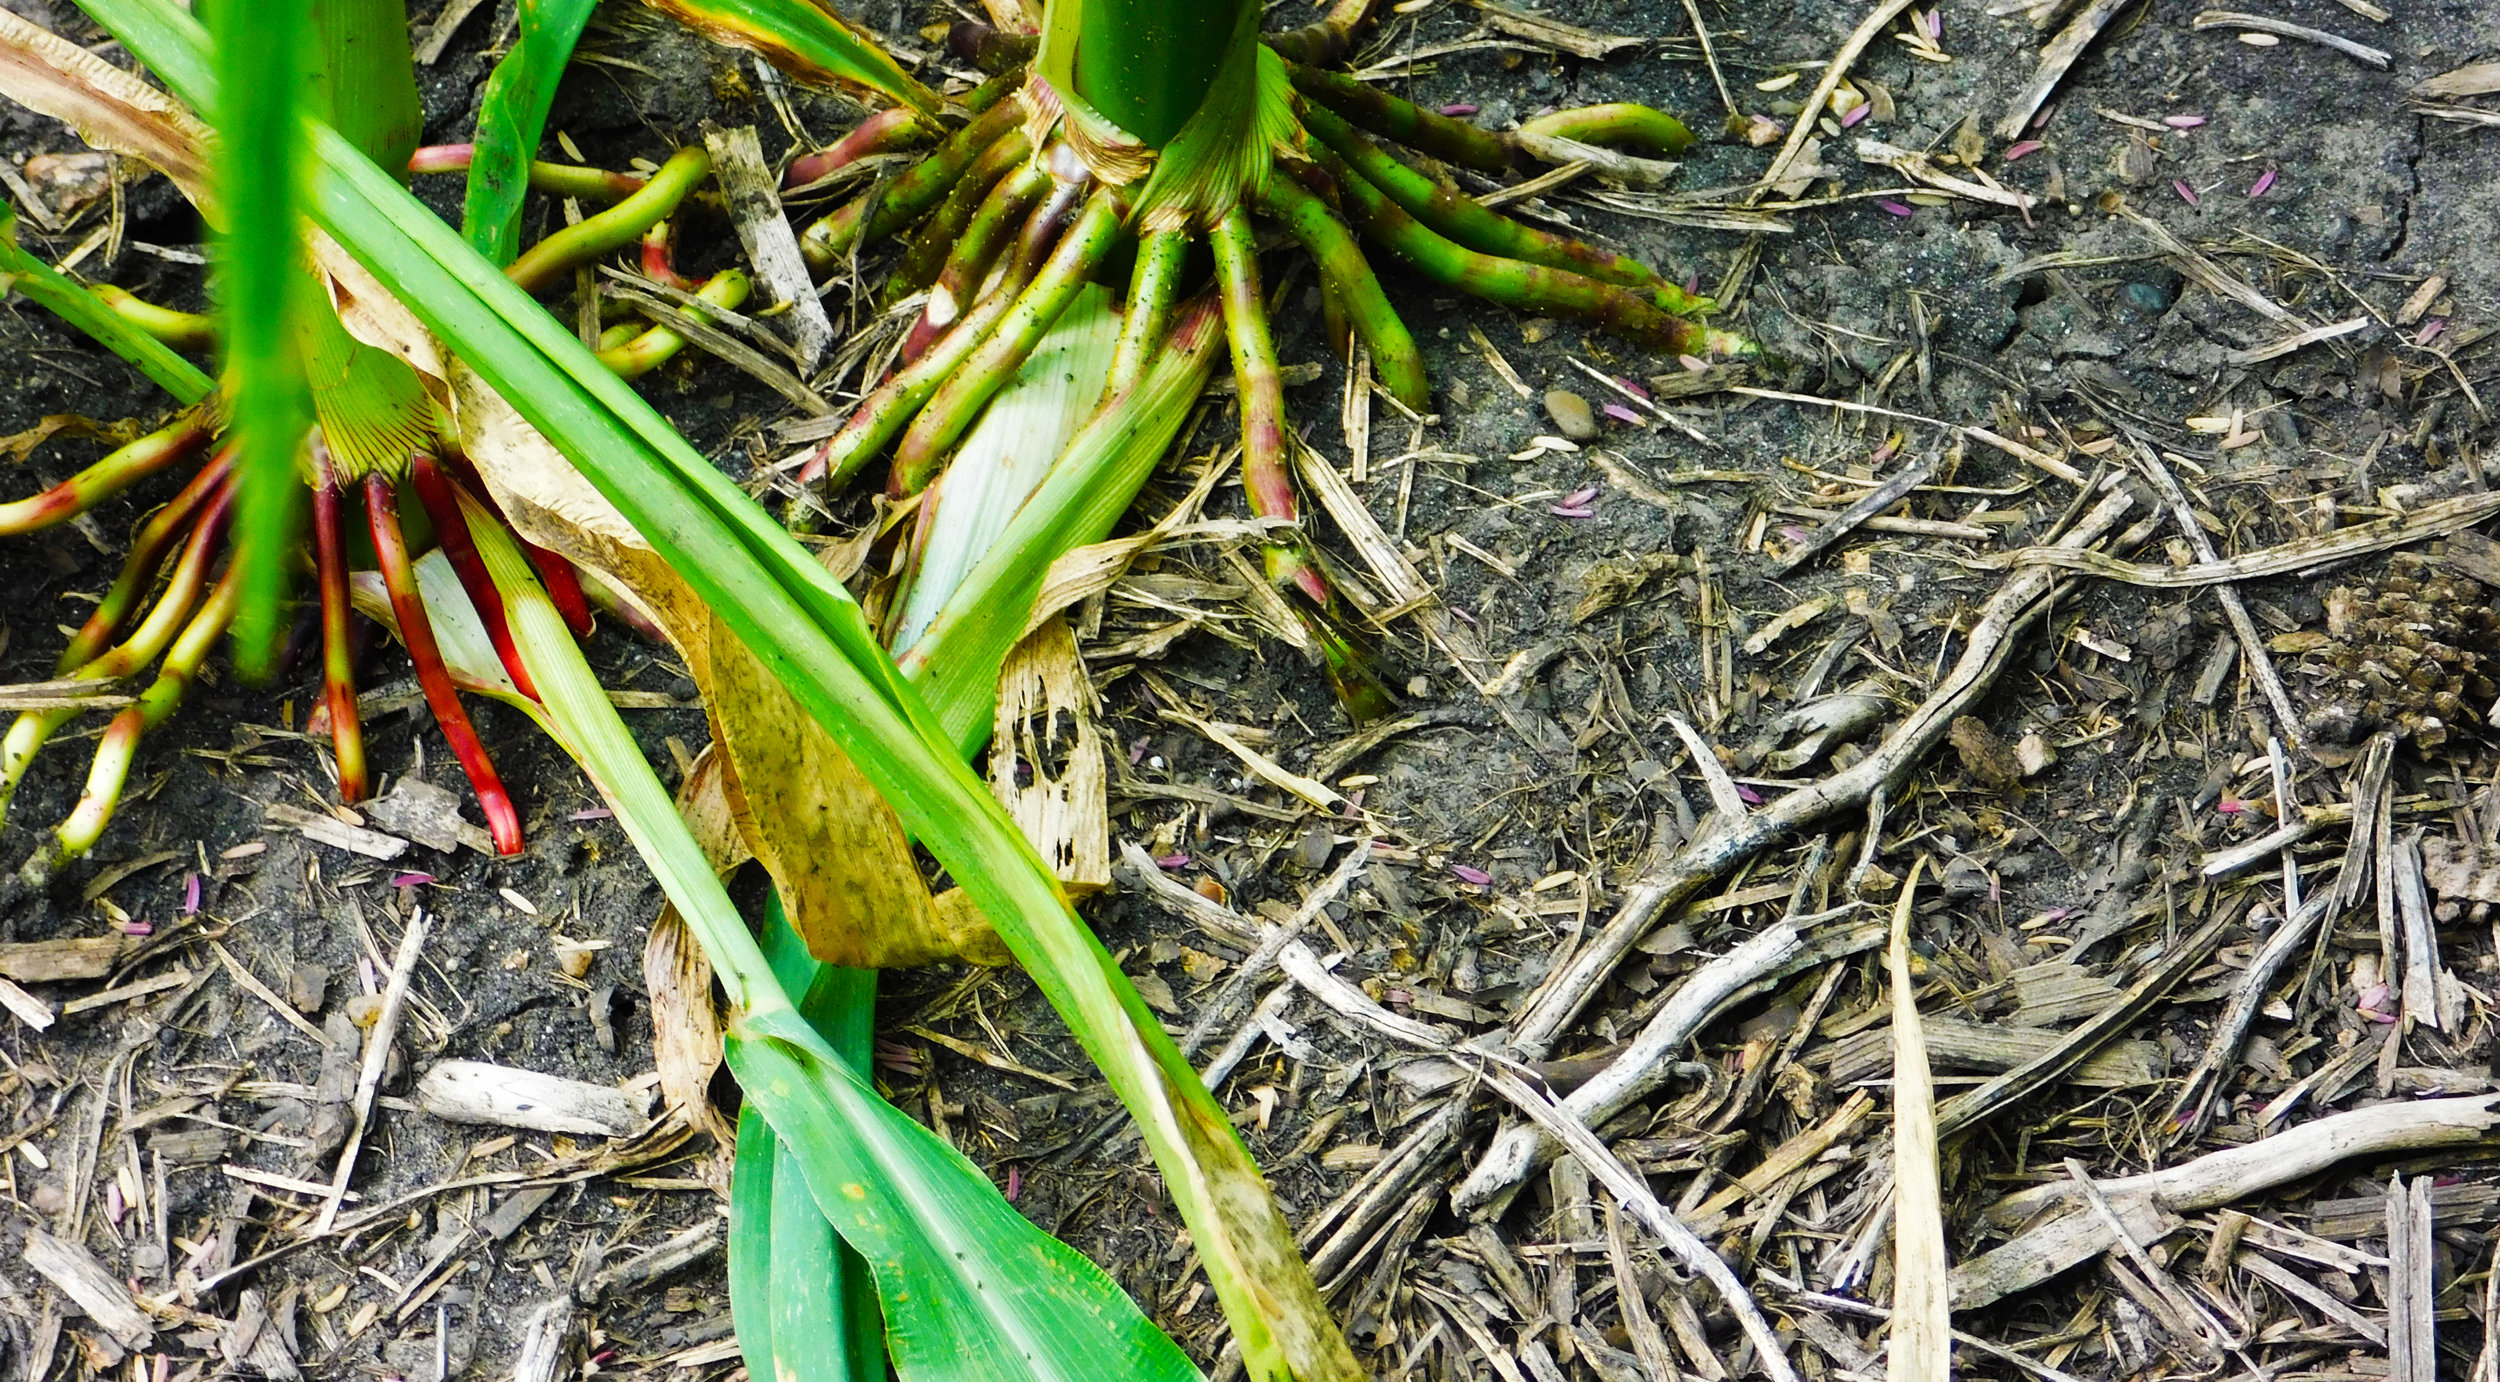 Roots from Youngblut's corn find their way through the remaining cover.